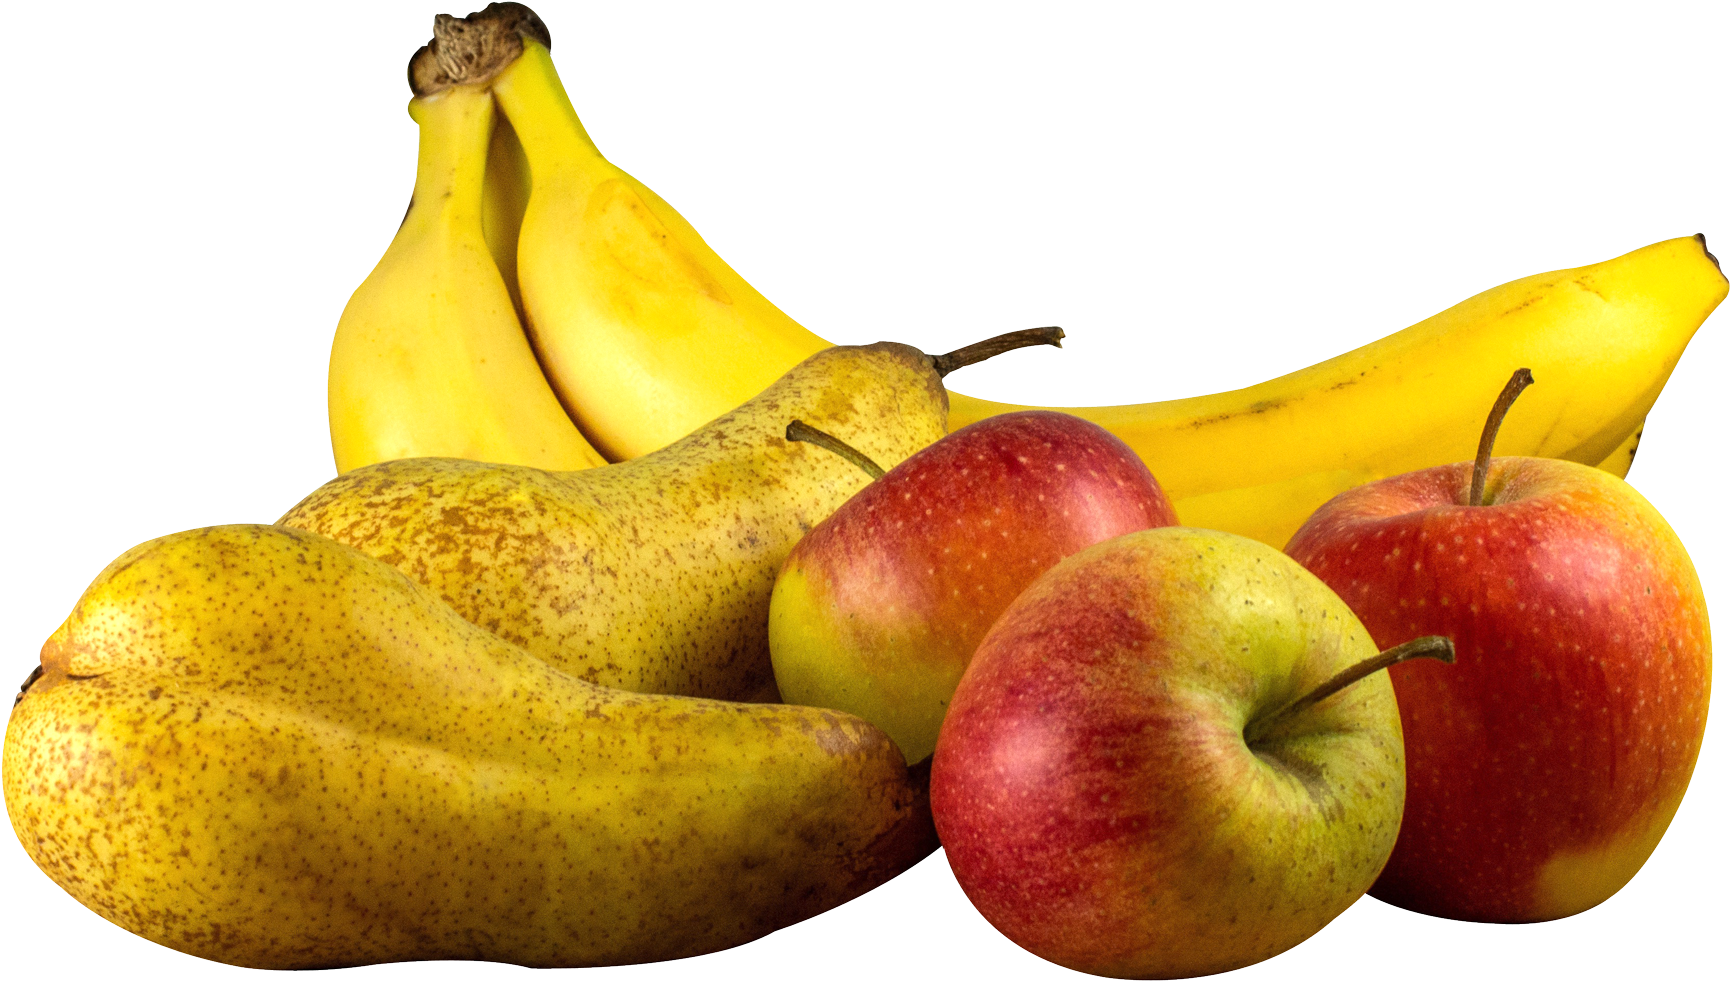 Free Fruit Png Images Download Free Fruit Png Images Png Images Free